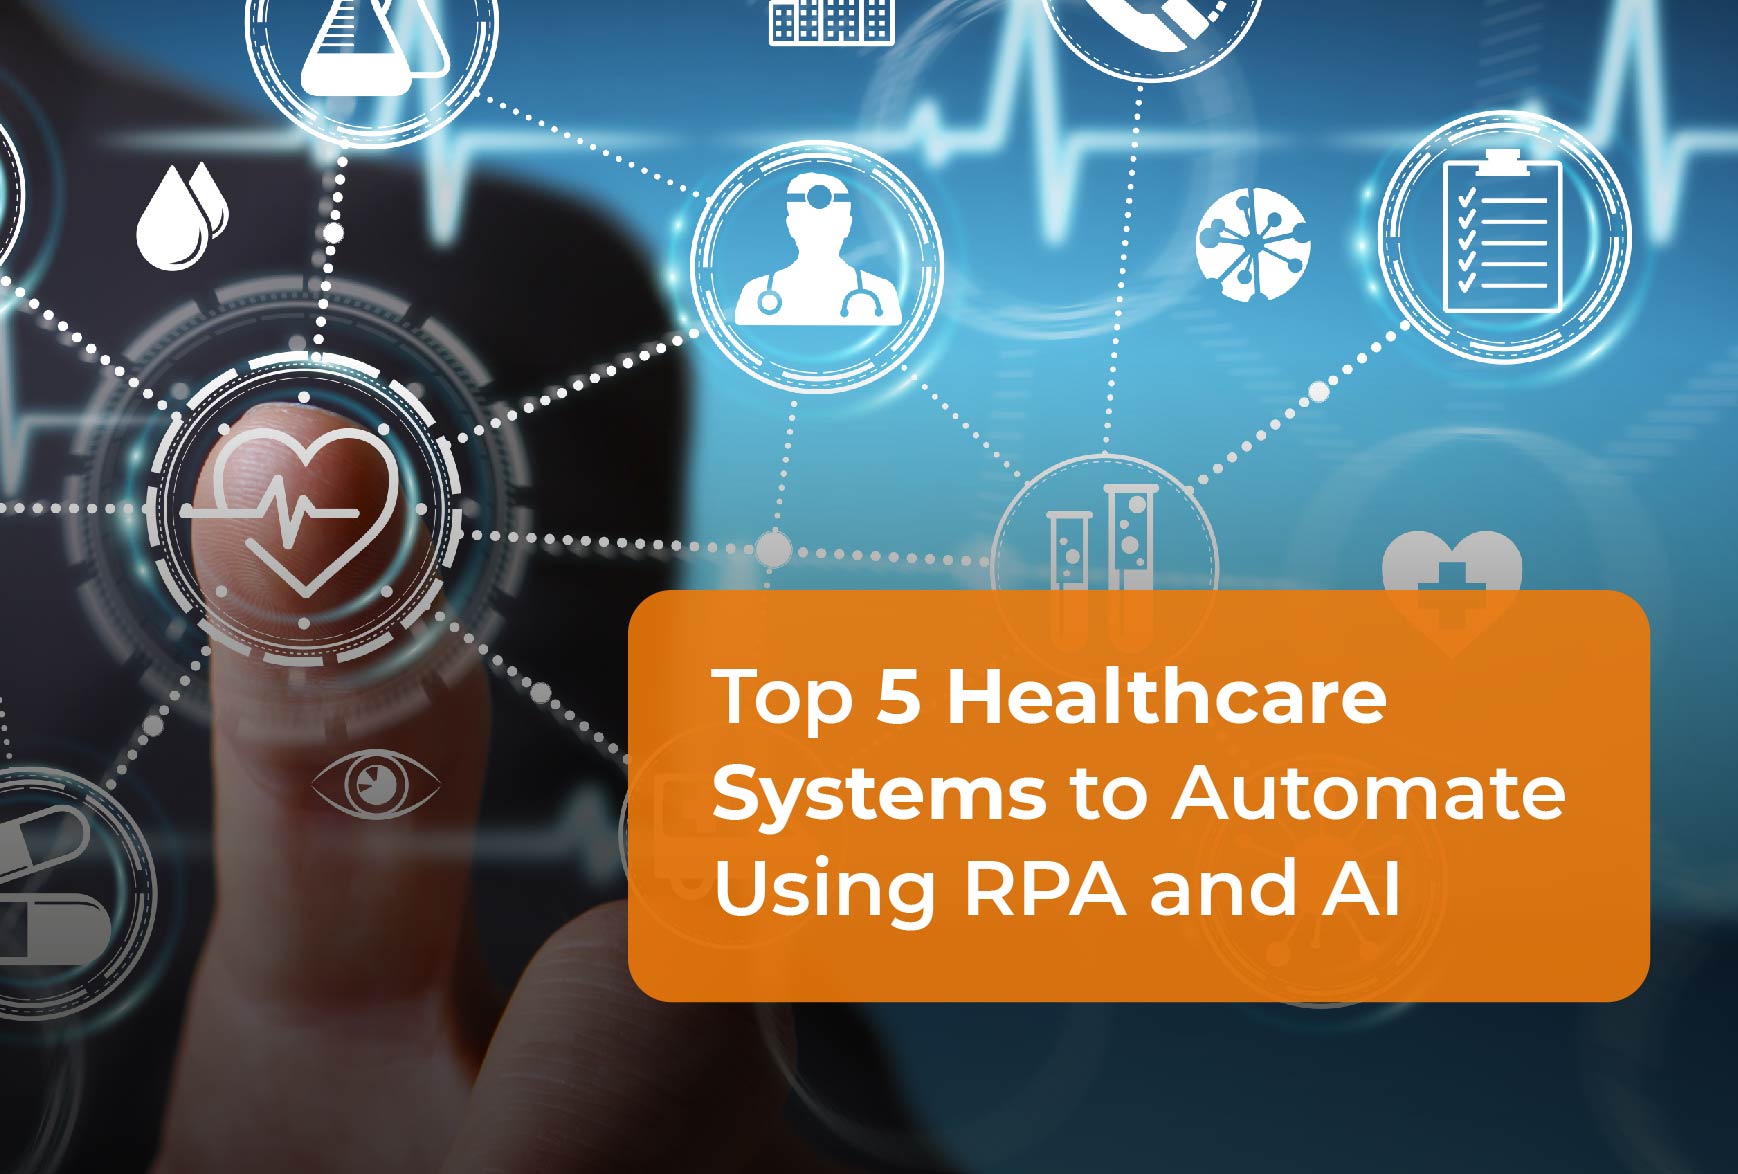 Top 5 Healthcare Systems to Automate Using RPA and AI